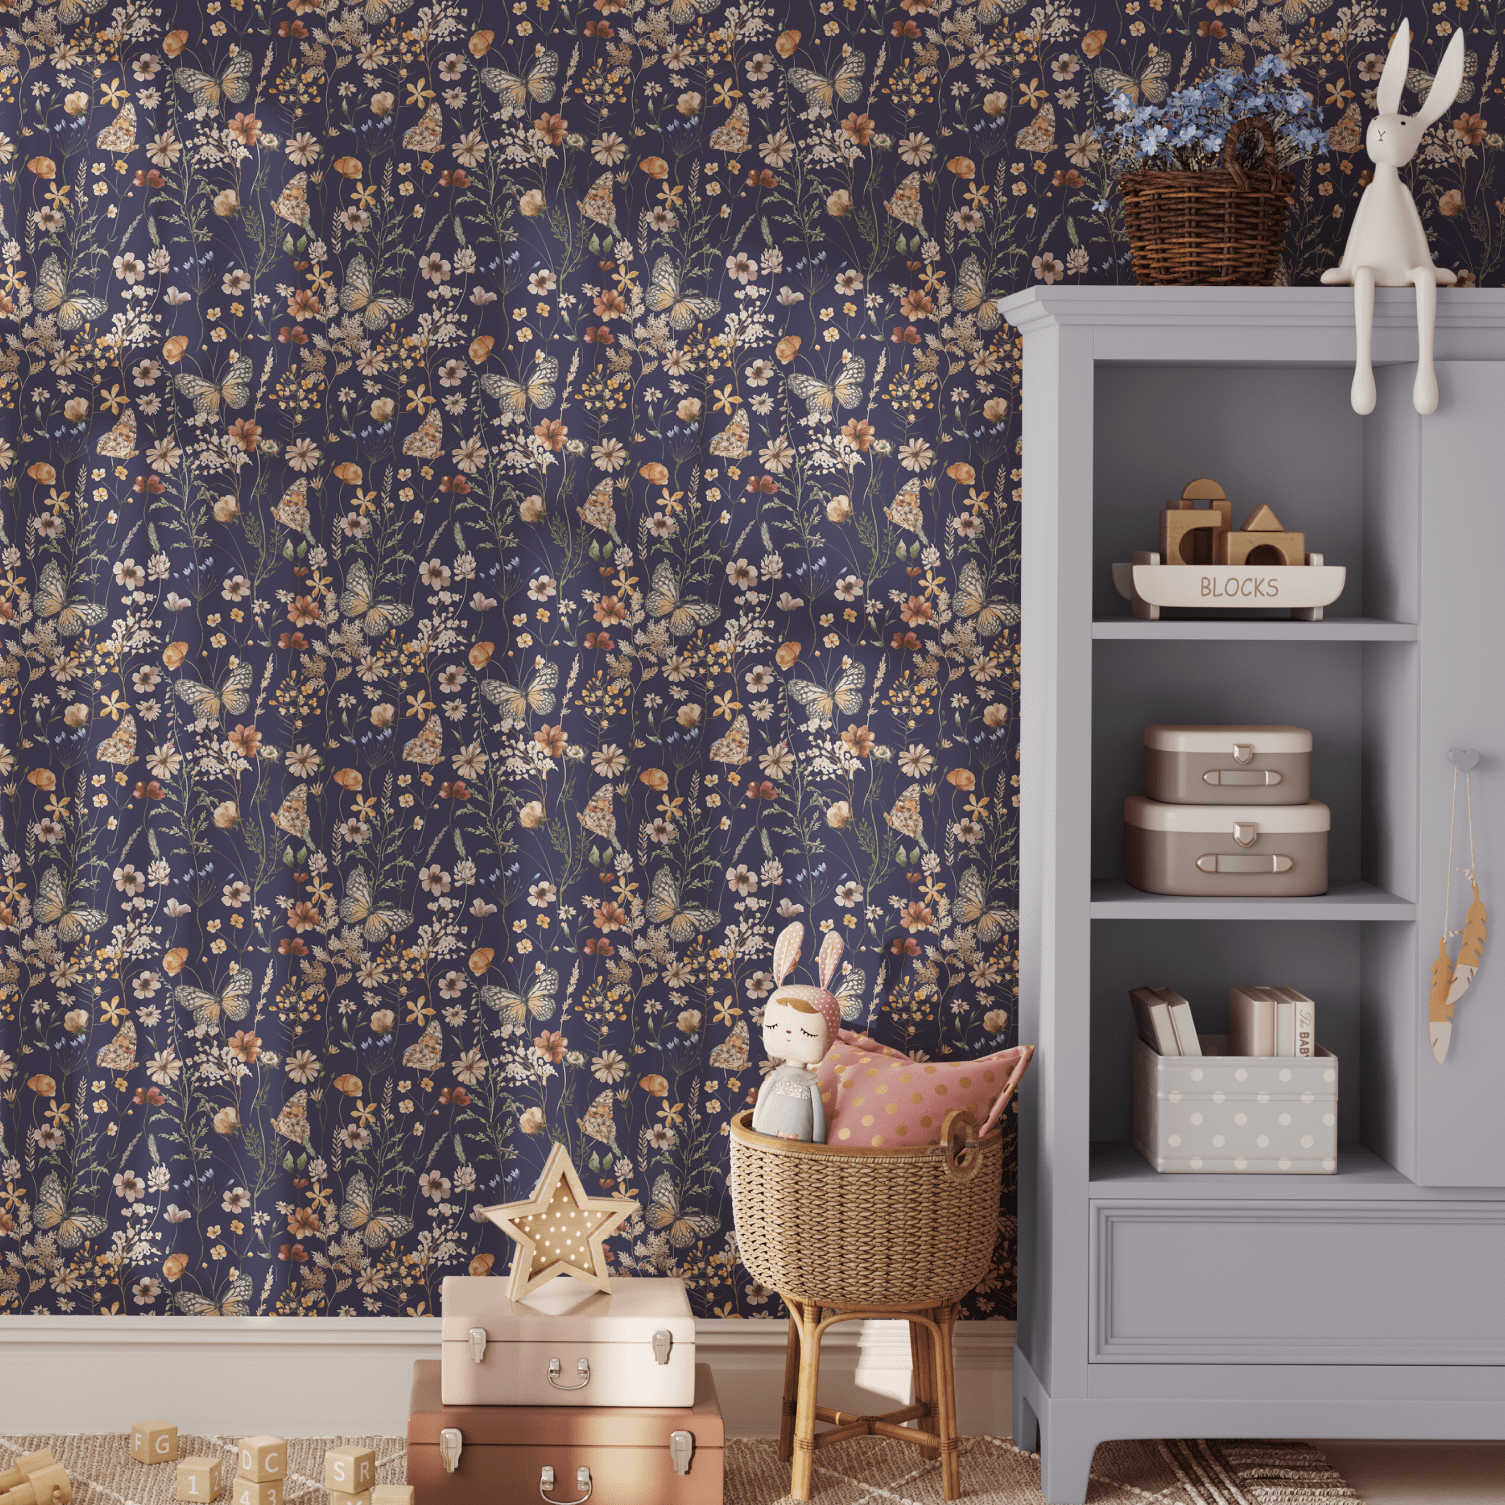 Butterfly and flower wallpaper with a navy blue backdrop